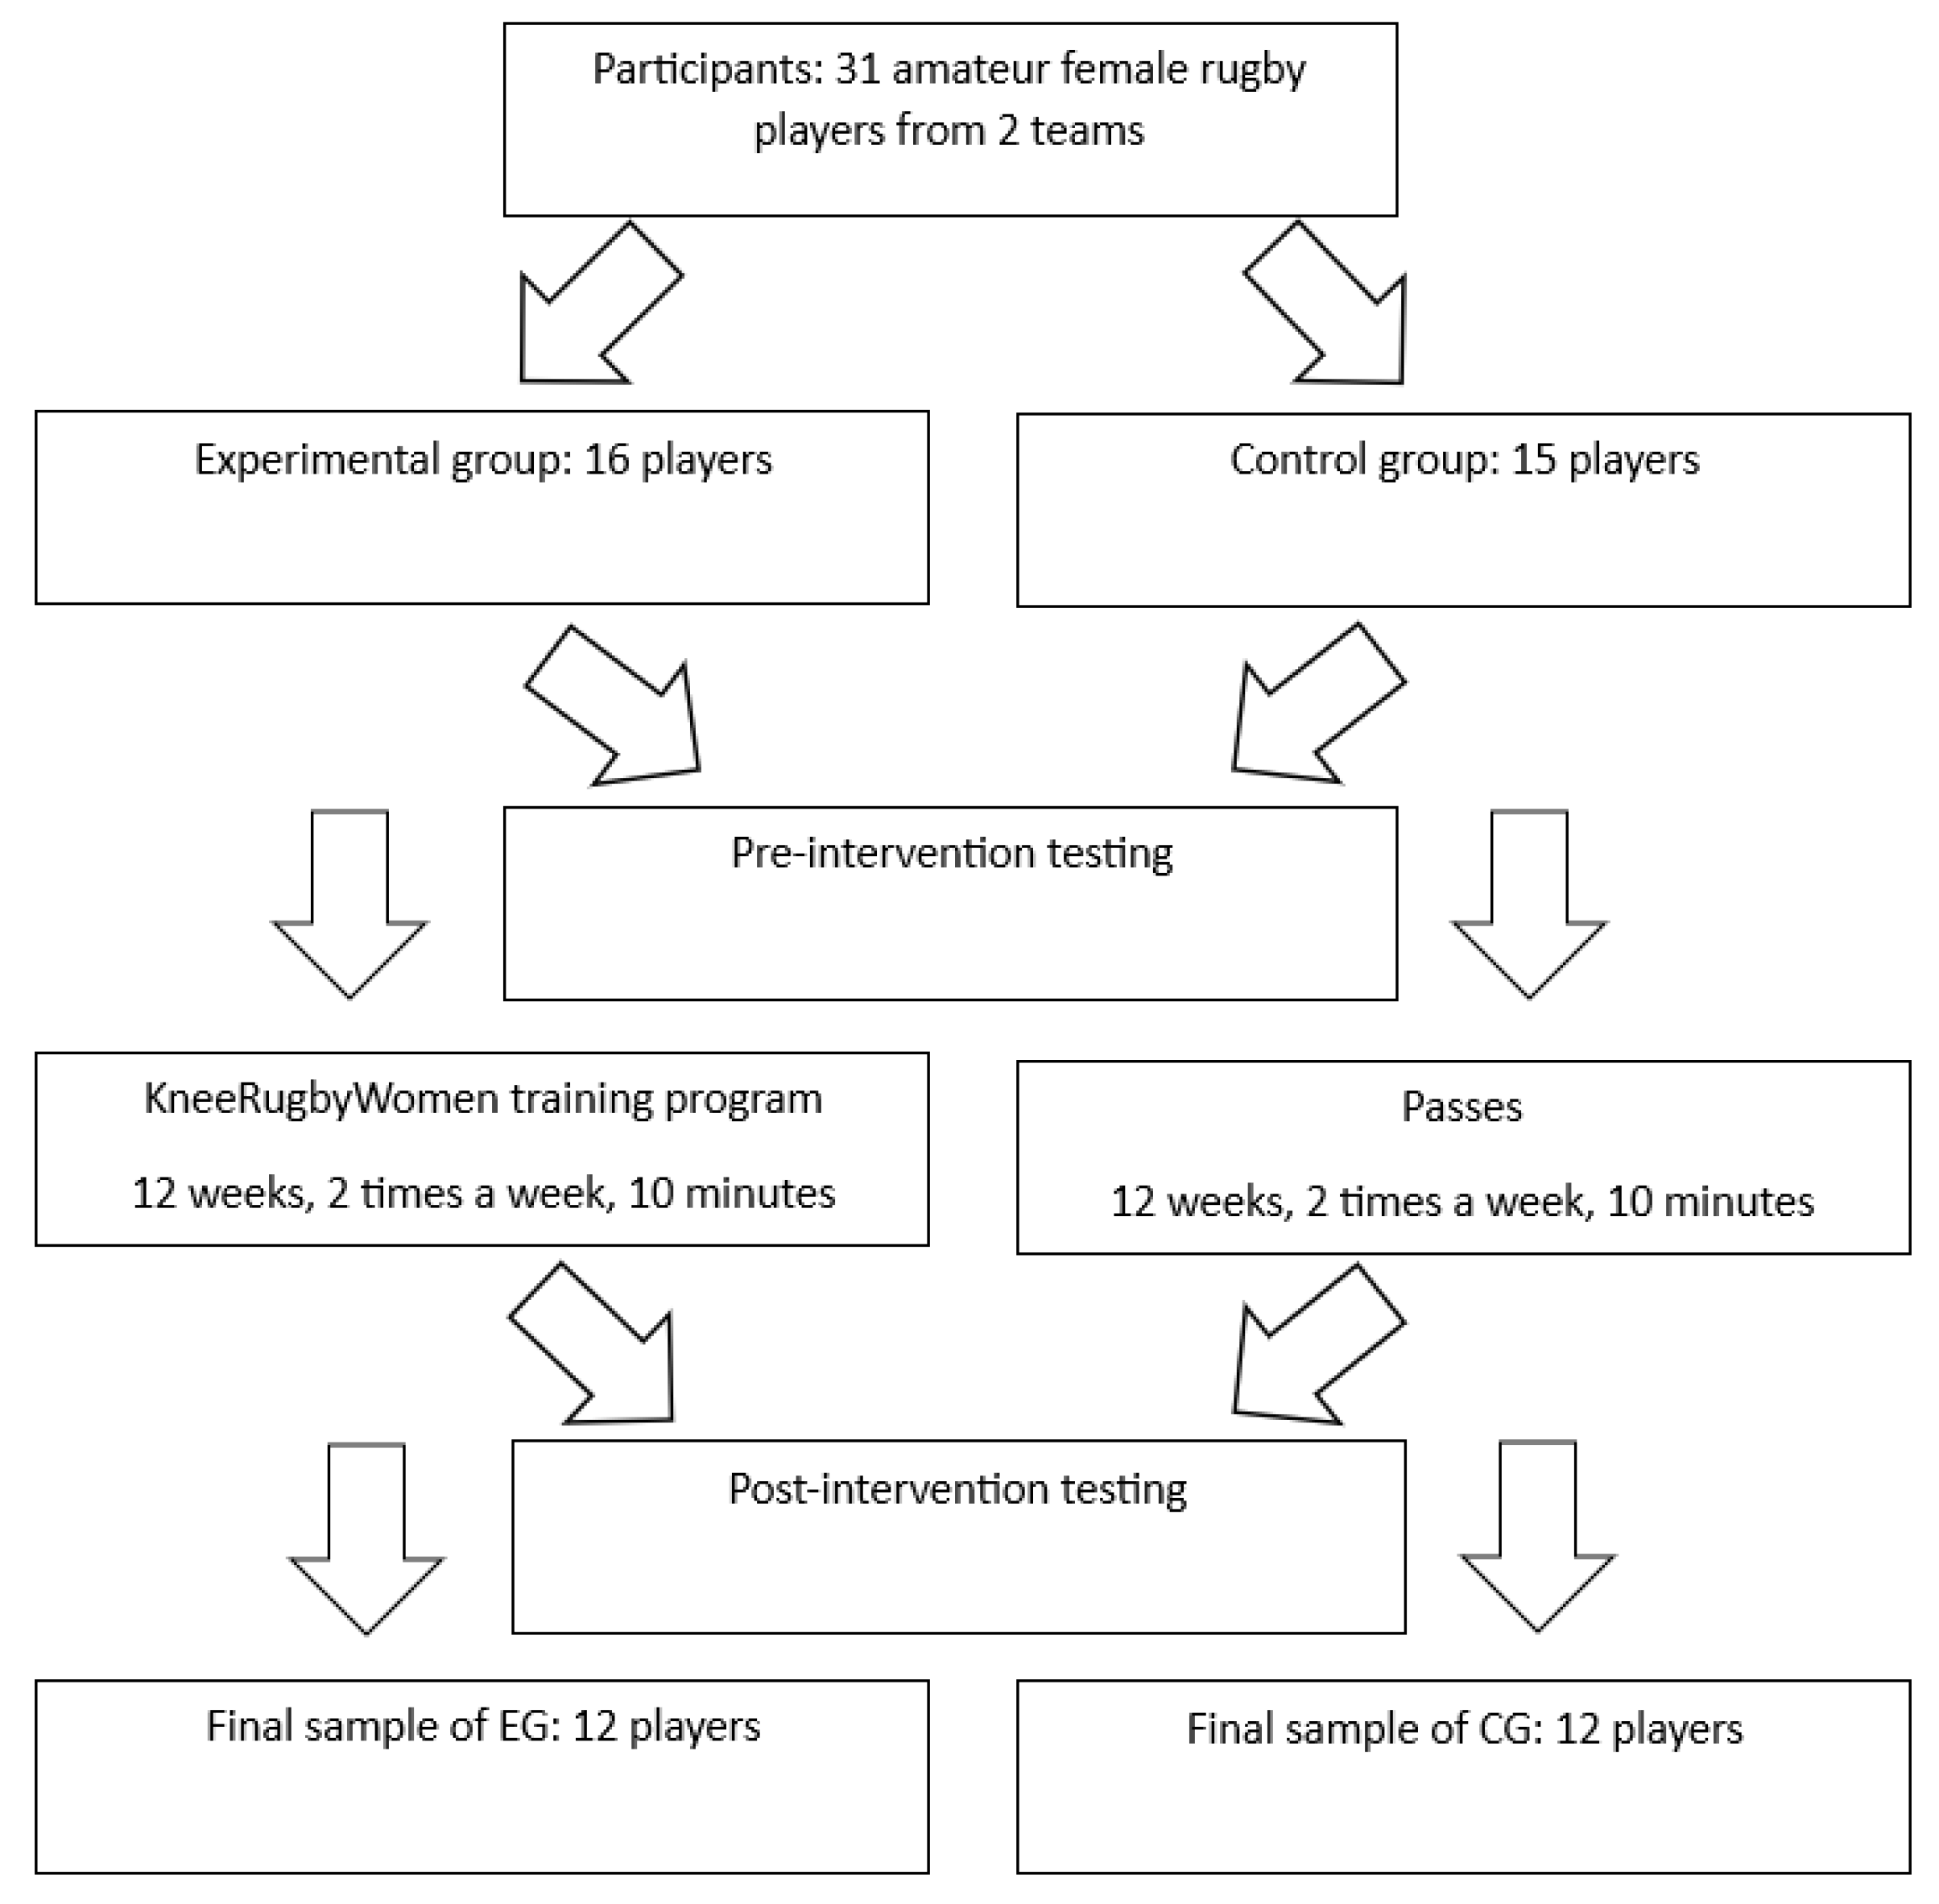 Applied Sciences Free Full-Text The Impact of a Novel Neuromuscular Training Program on Leg Stiffness, Reactive Strength, and Landing Biomechanics in Amateur Female Rugby Players image